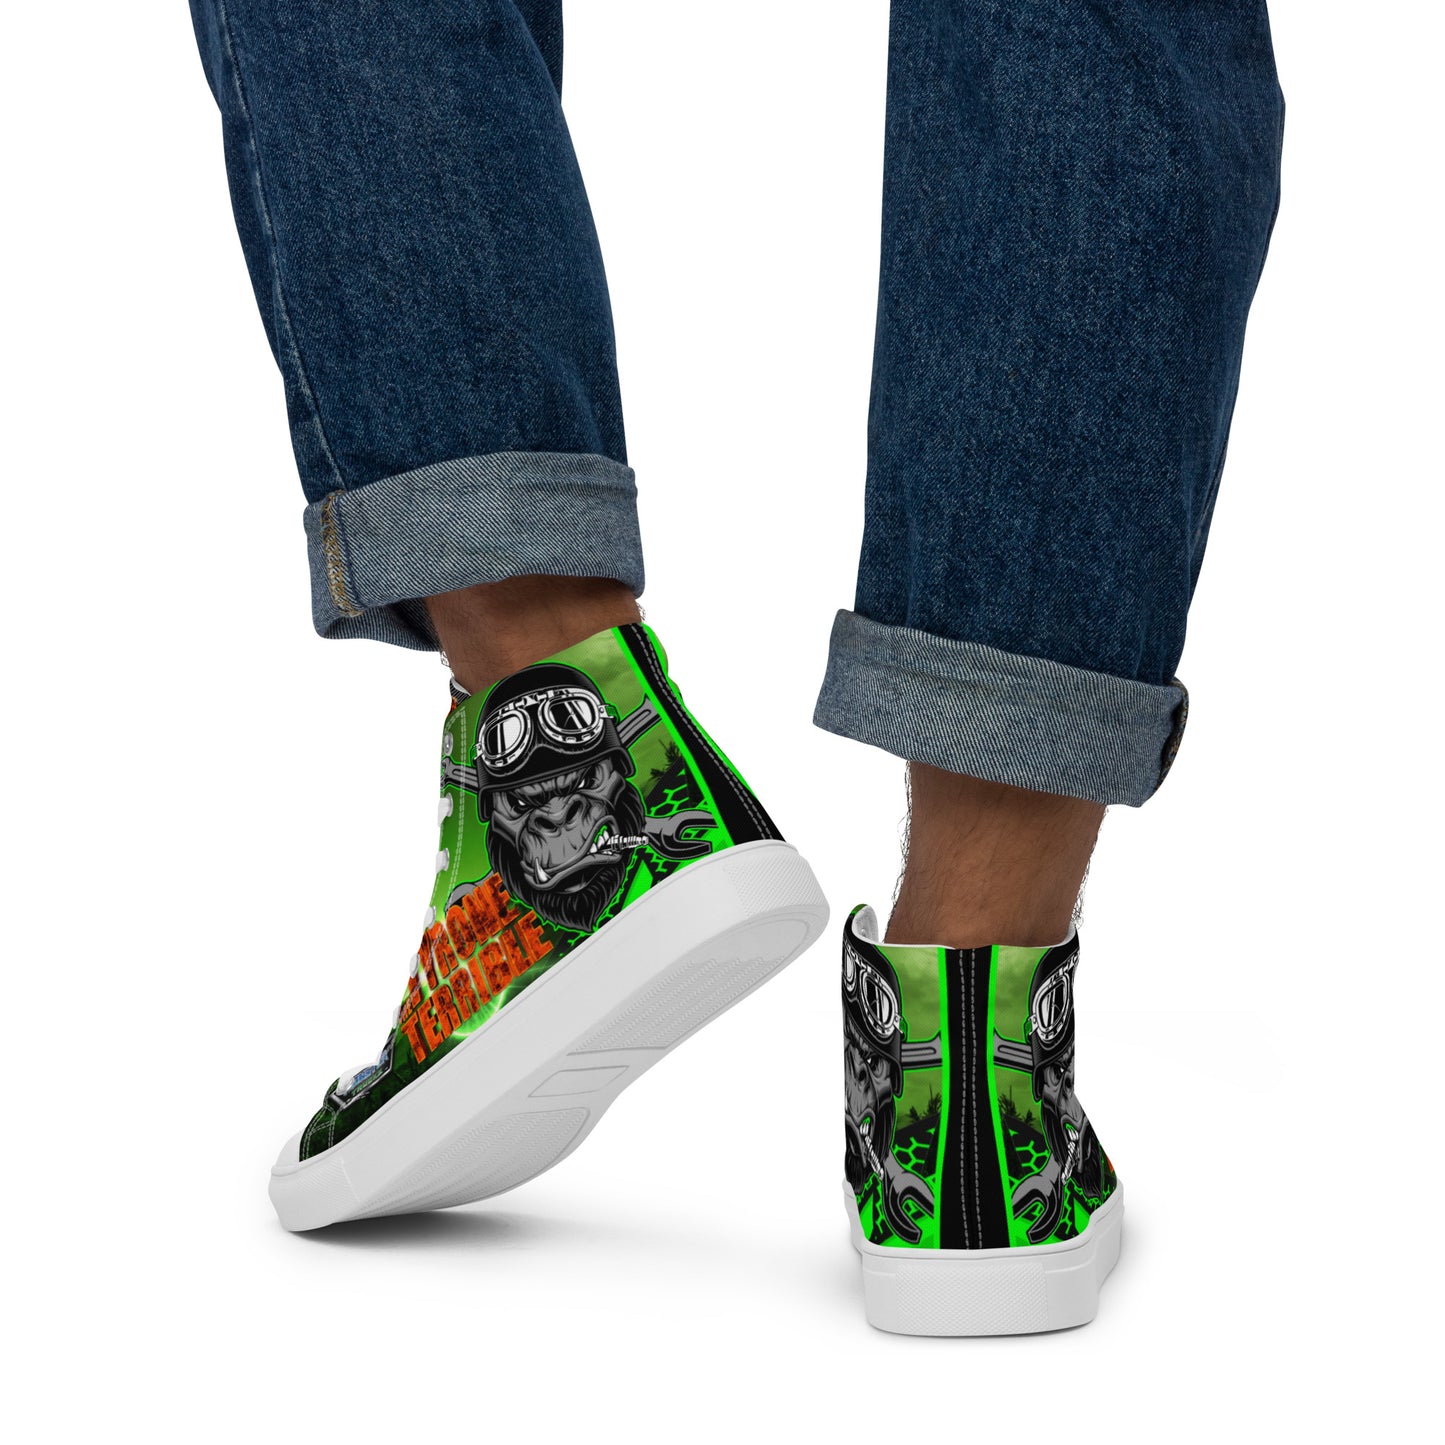 Tyrone The Terrible Men’s high top canvas shoes